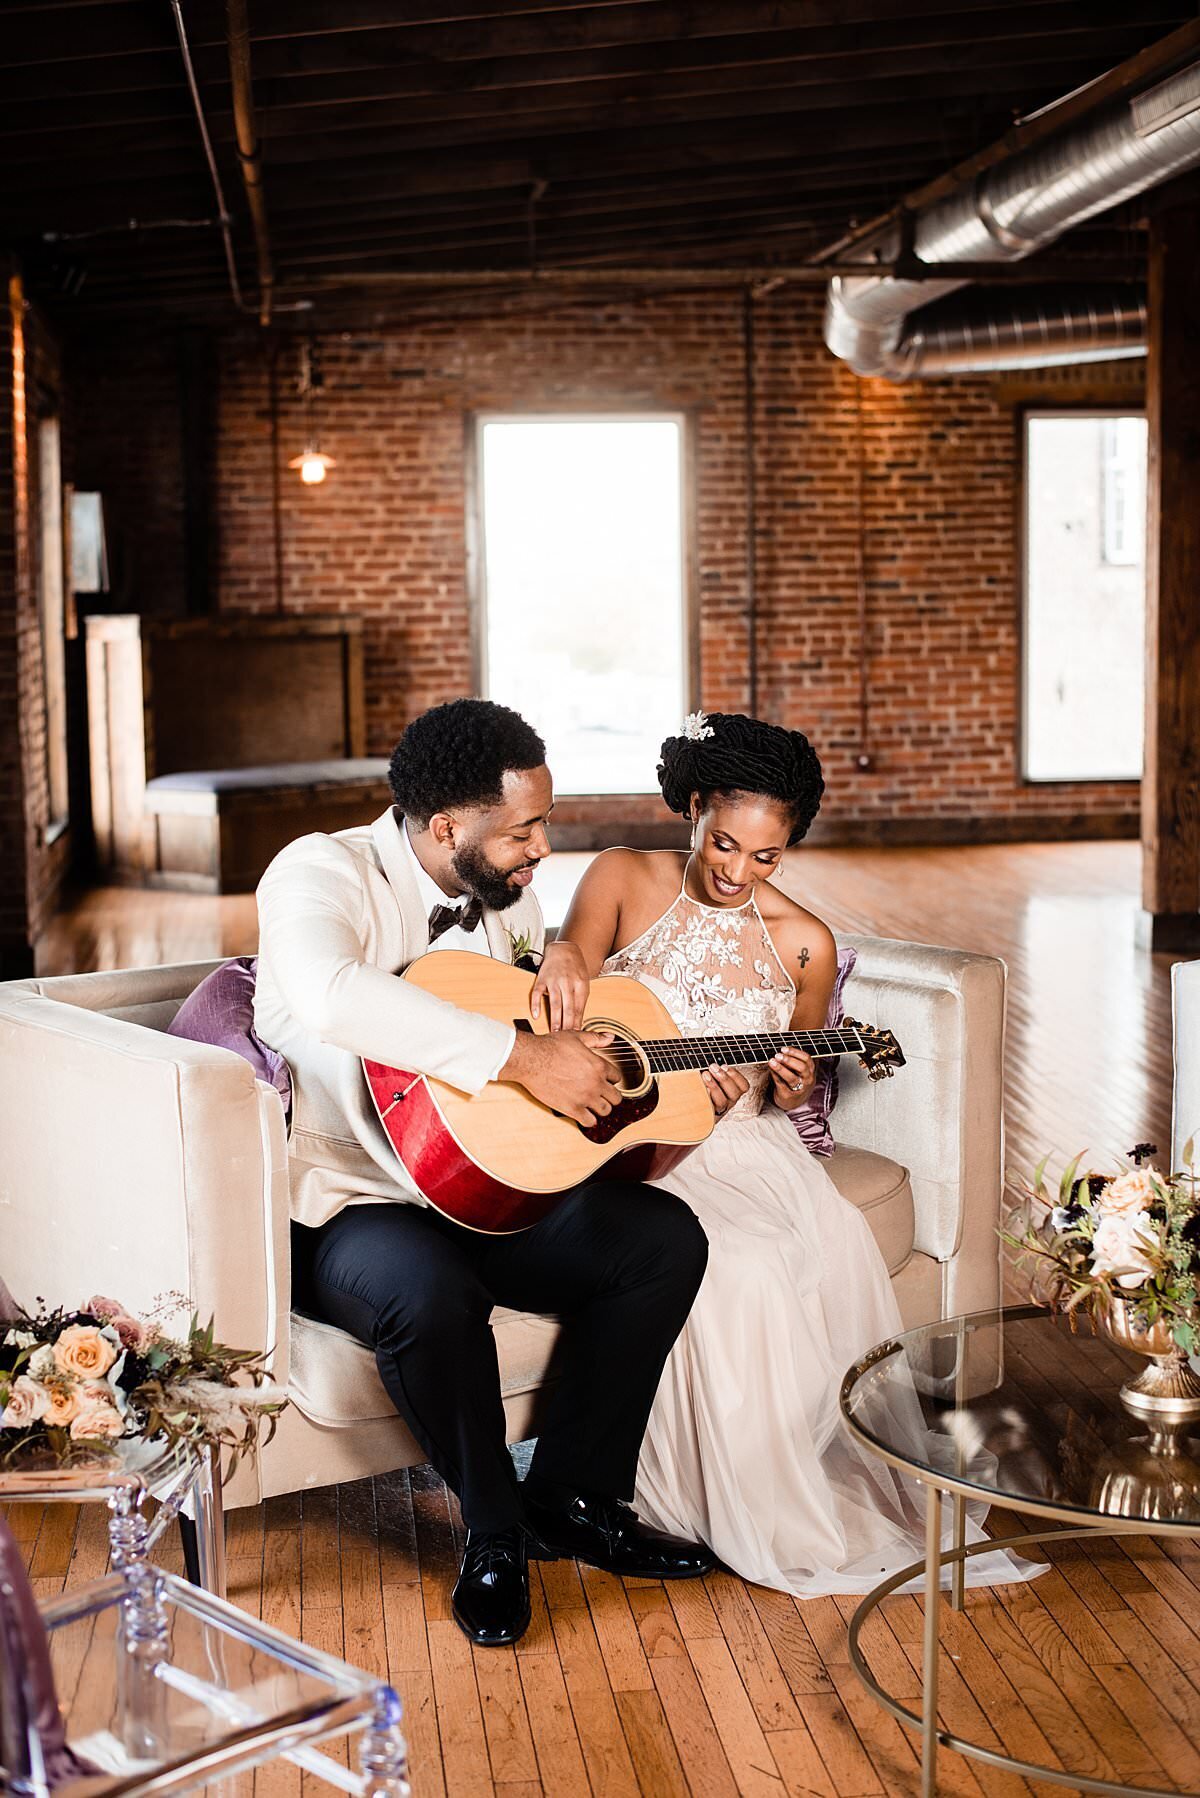 Couple sitting together on their wedding day in a cocktail setting playing the guitar